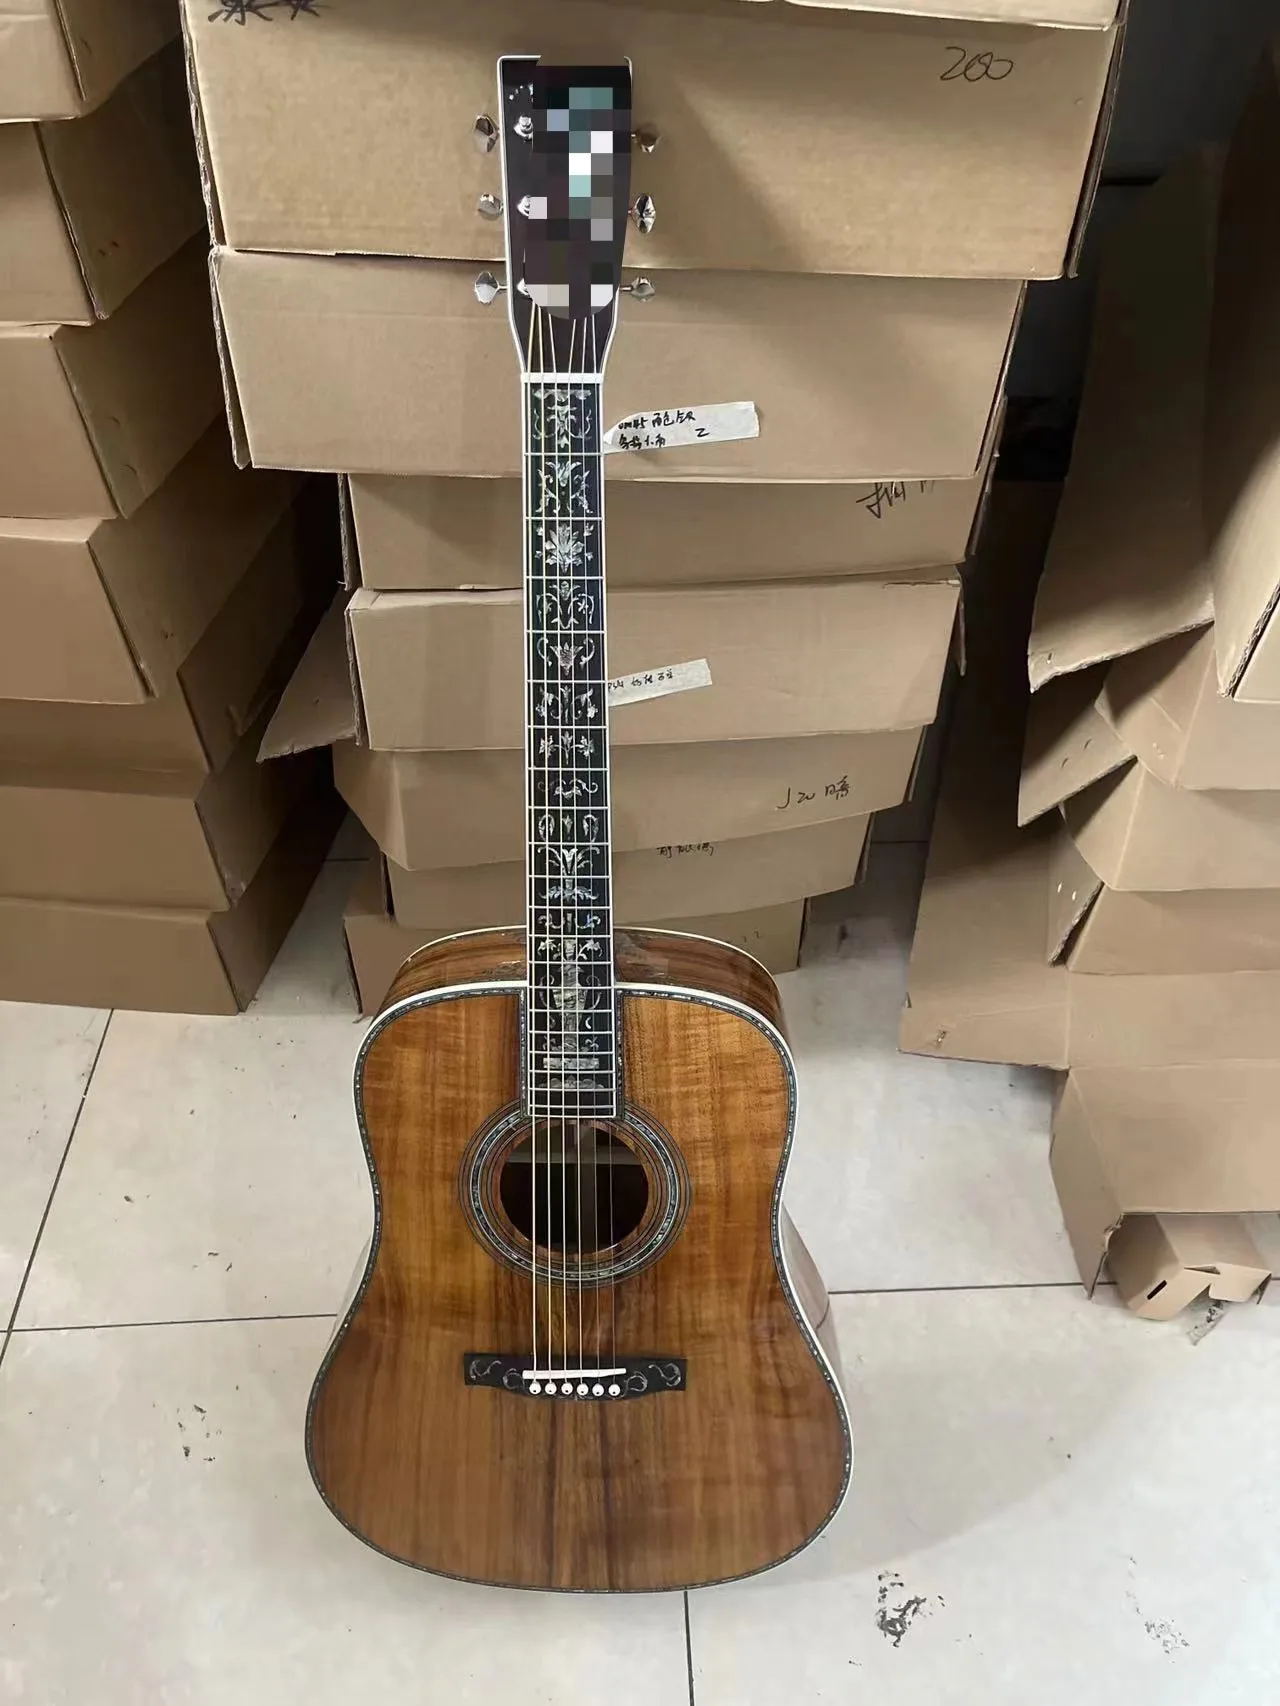 

New 41" 6-string acoustic guitar. Spruce veneer and rosewood back and sides, ebony fretboard, abalone shell inlay, super deluxe.